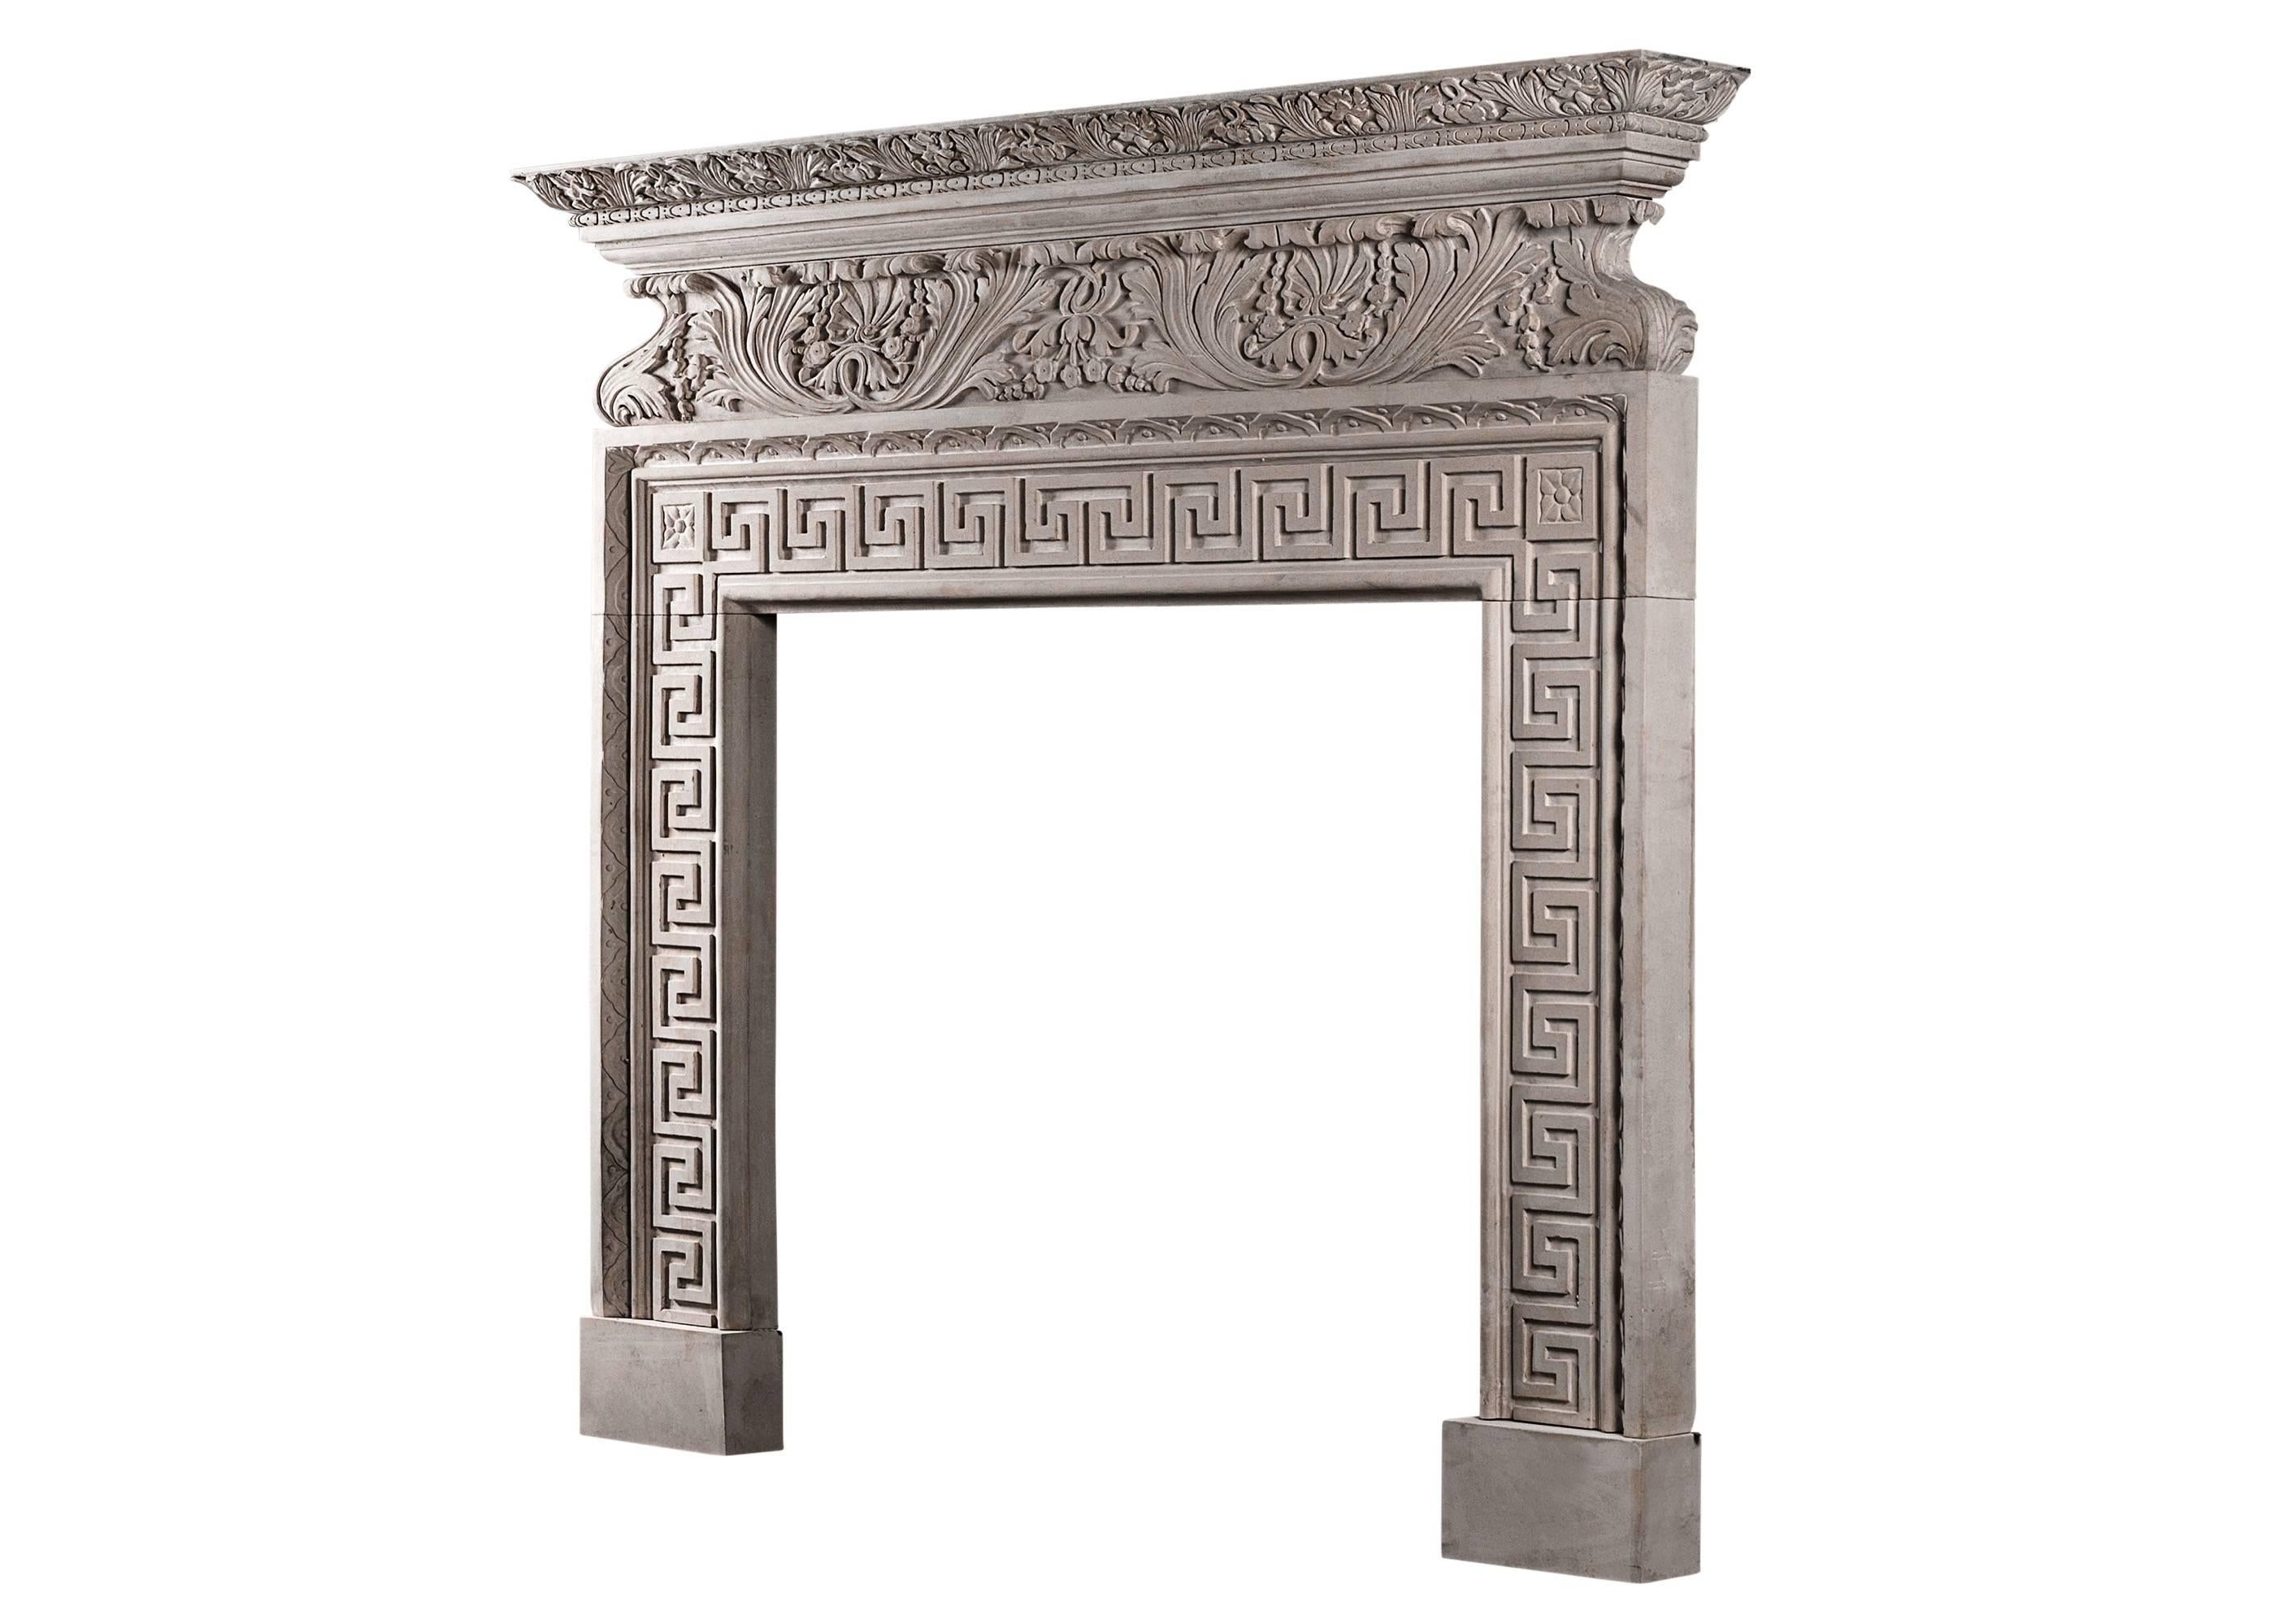 An Italian Baroque style fireplace richly carved from Portland stone. The ogee shaped frieze with carved acanthus leaves, shells and flowers. Similar carving to moulded shelf, and Classical Greek key to jambs. A quality reproduction